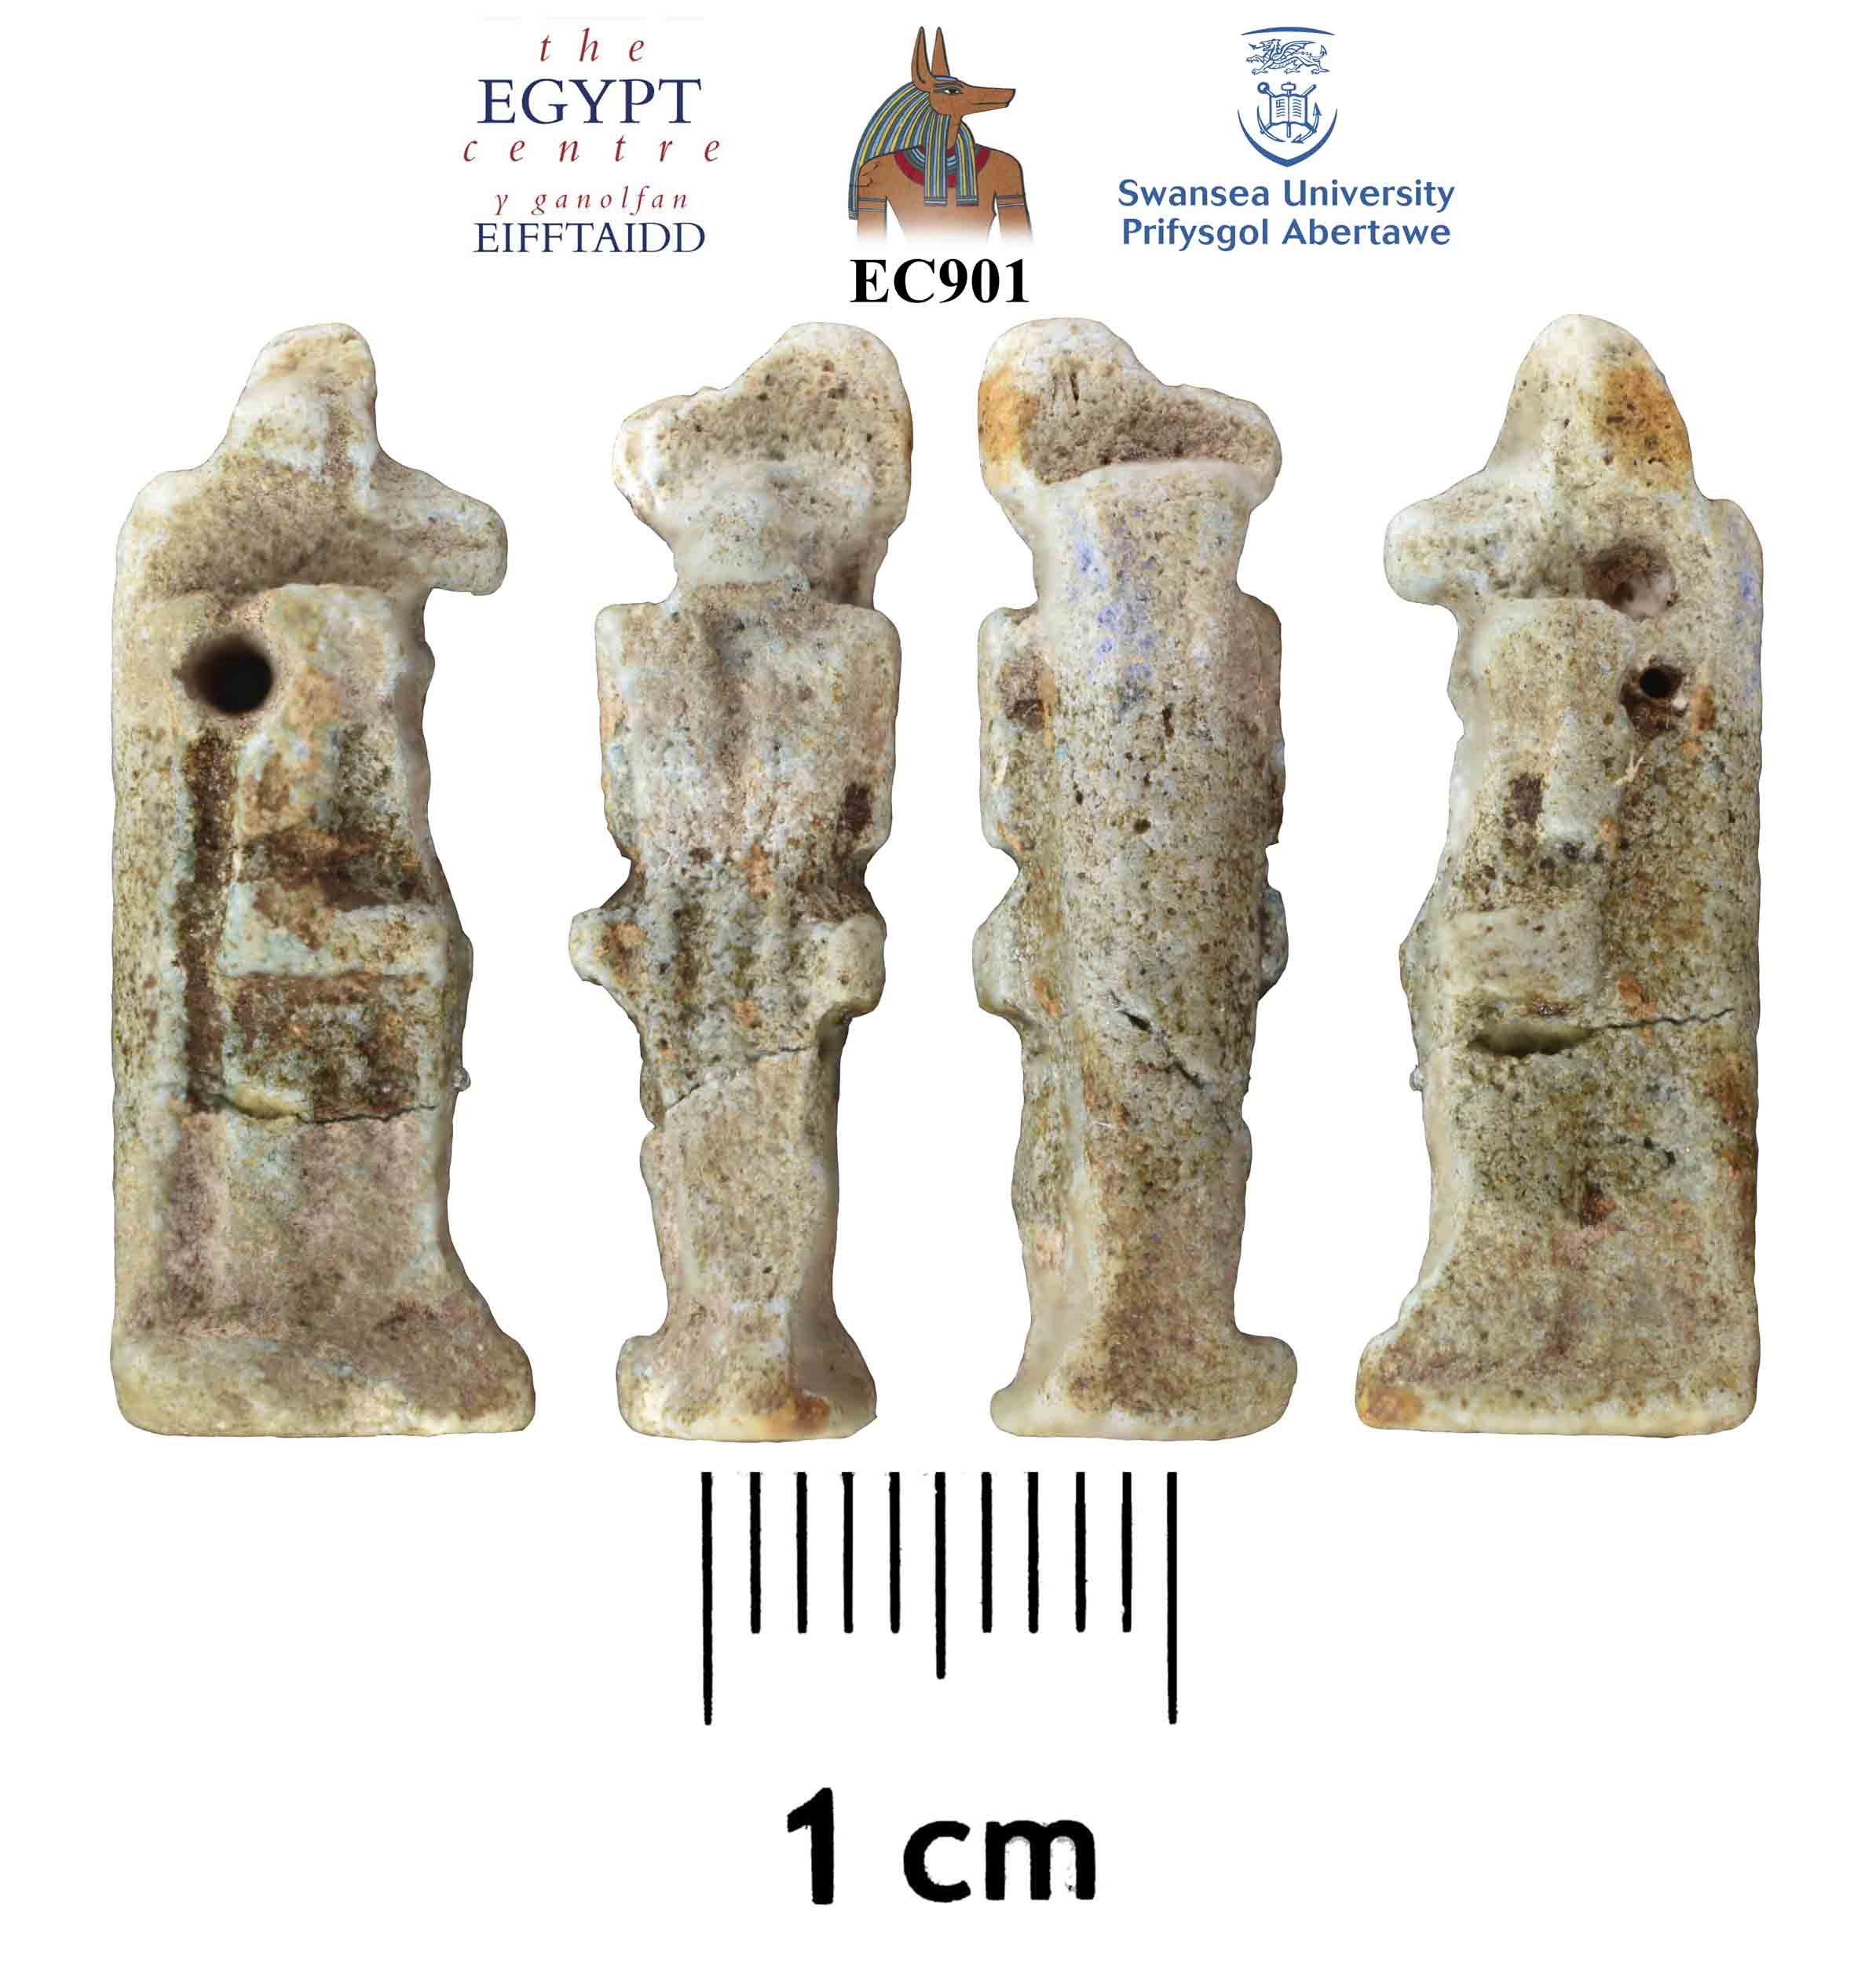 Image for: Faience amulet of Anubis